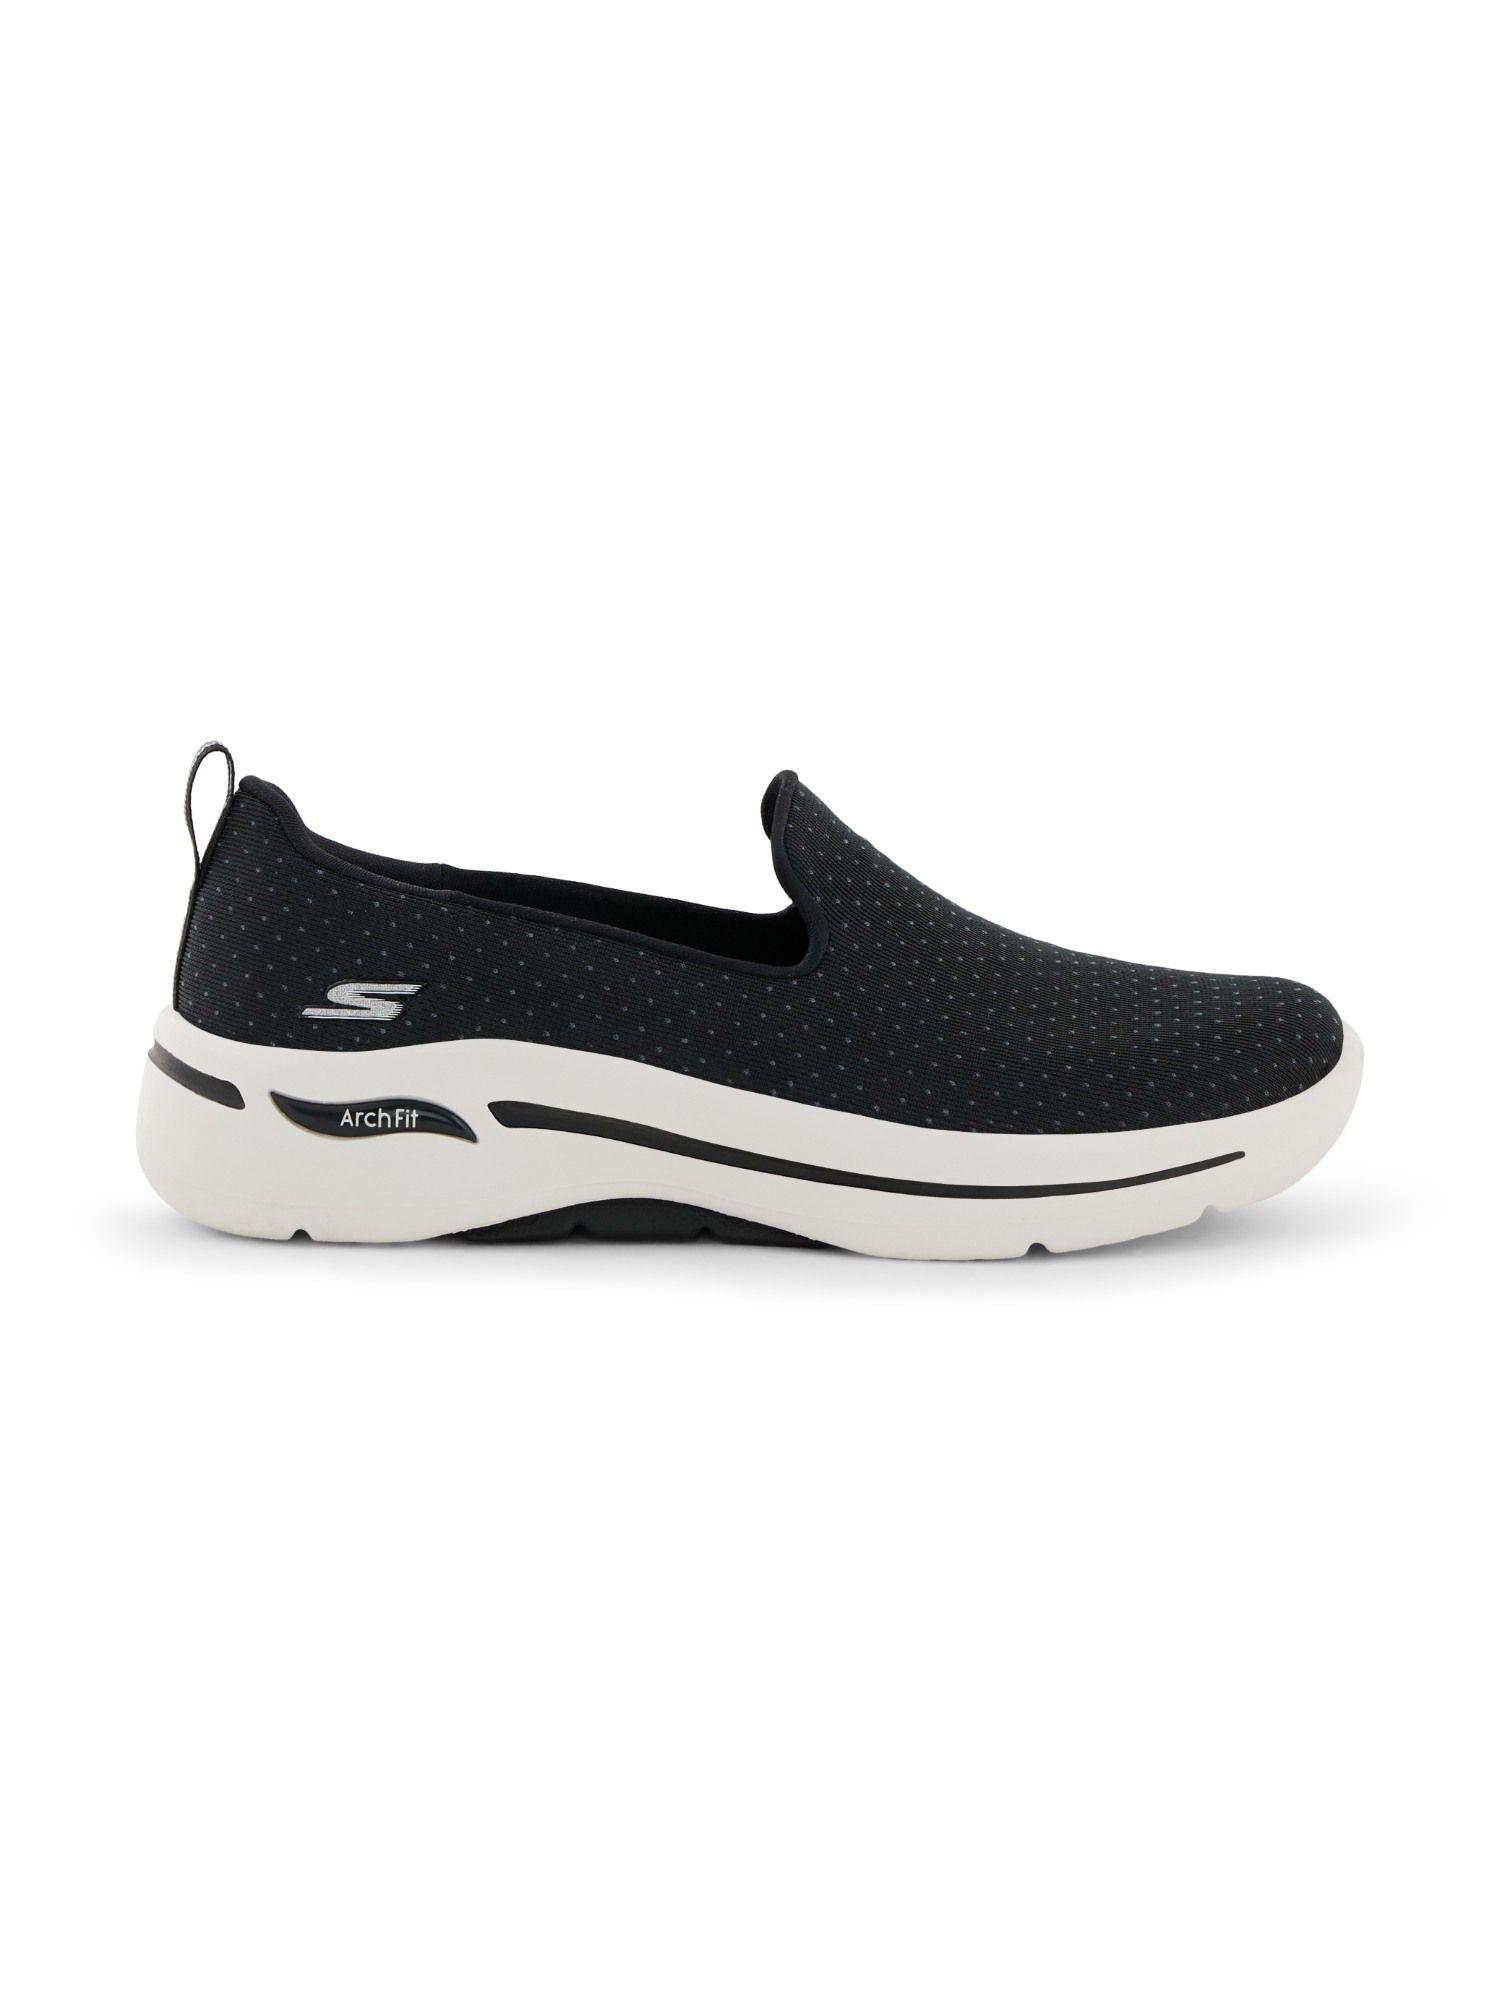 go walk arch fit - morning st black walking shoes